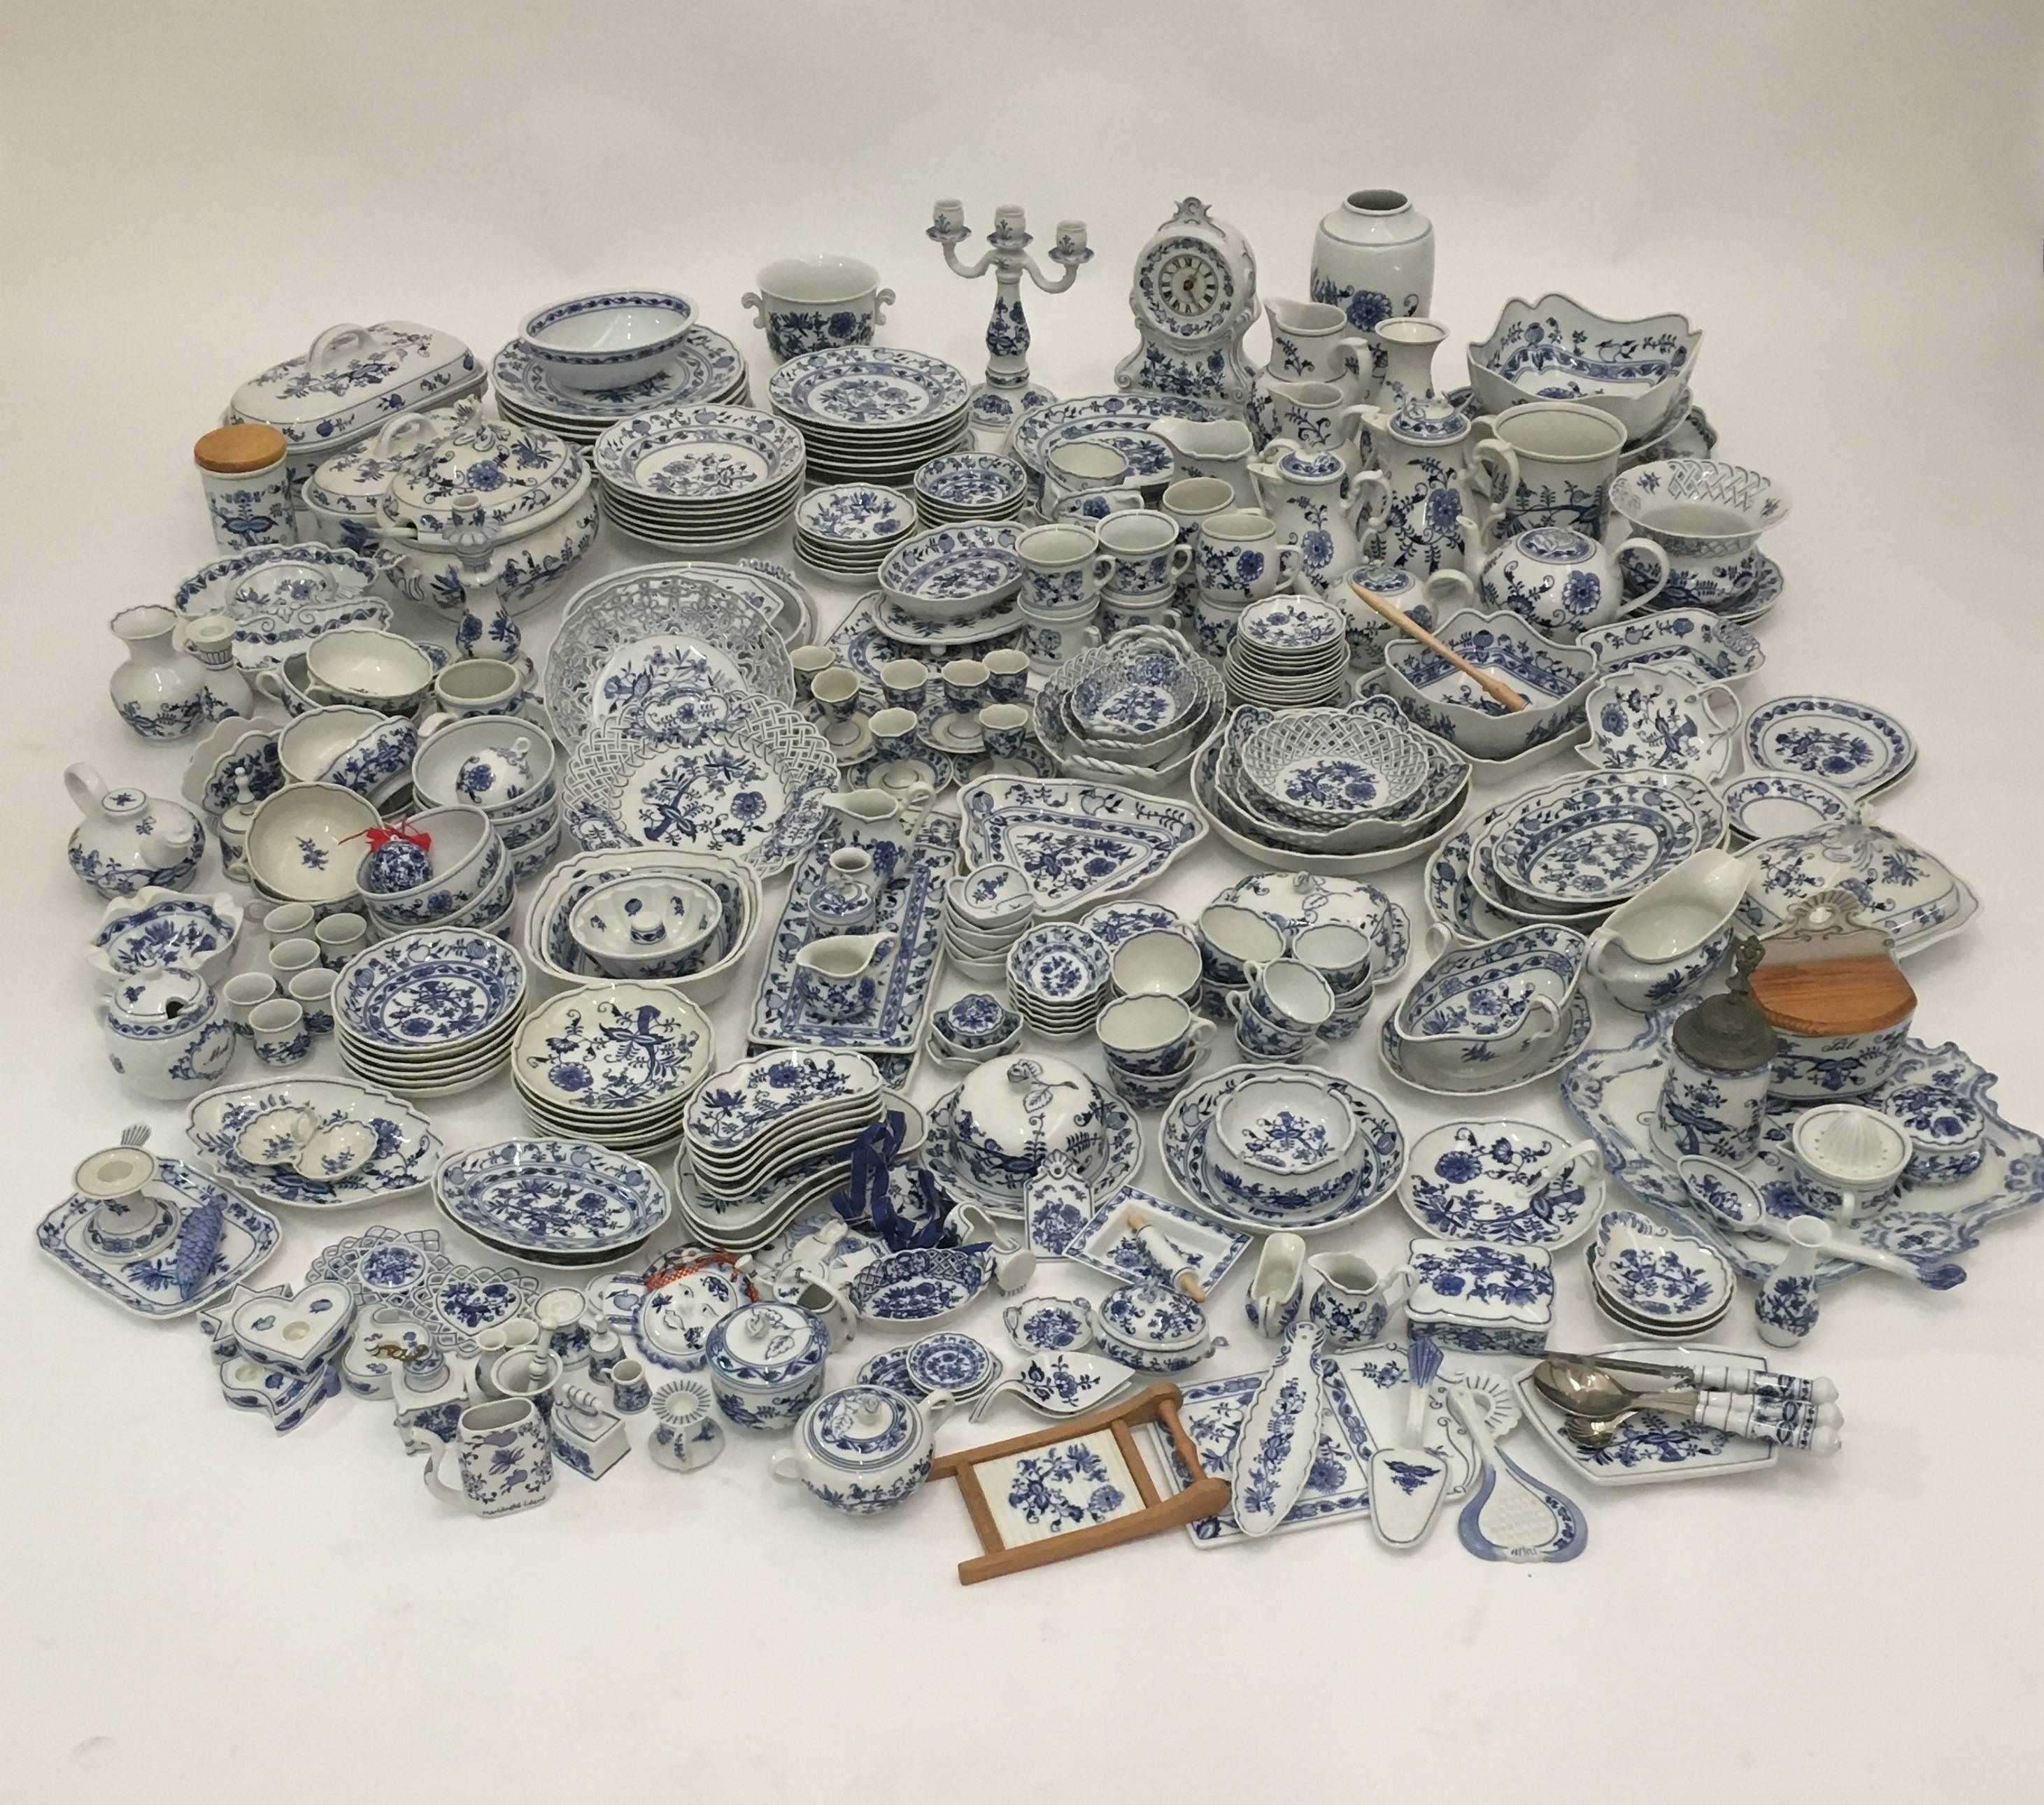 Exceptional 305 Pieces Meissen and Bohemia Zwiebelmuster Porcelain Set 1885-1992 2